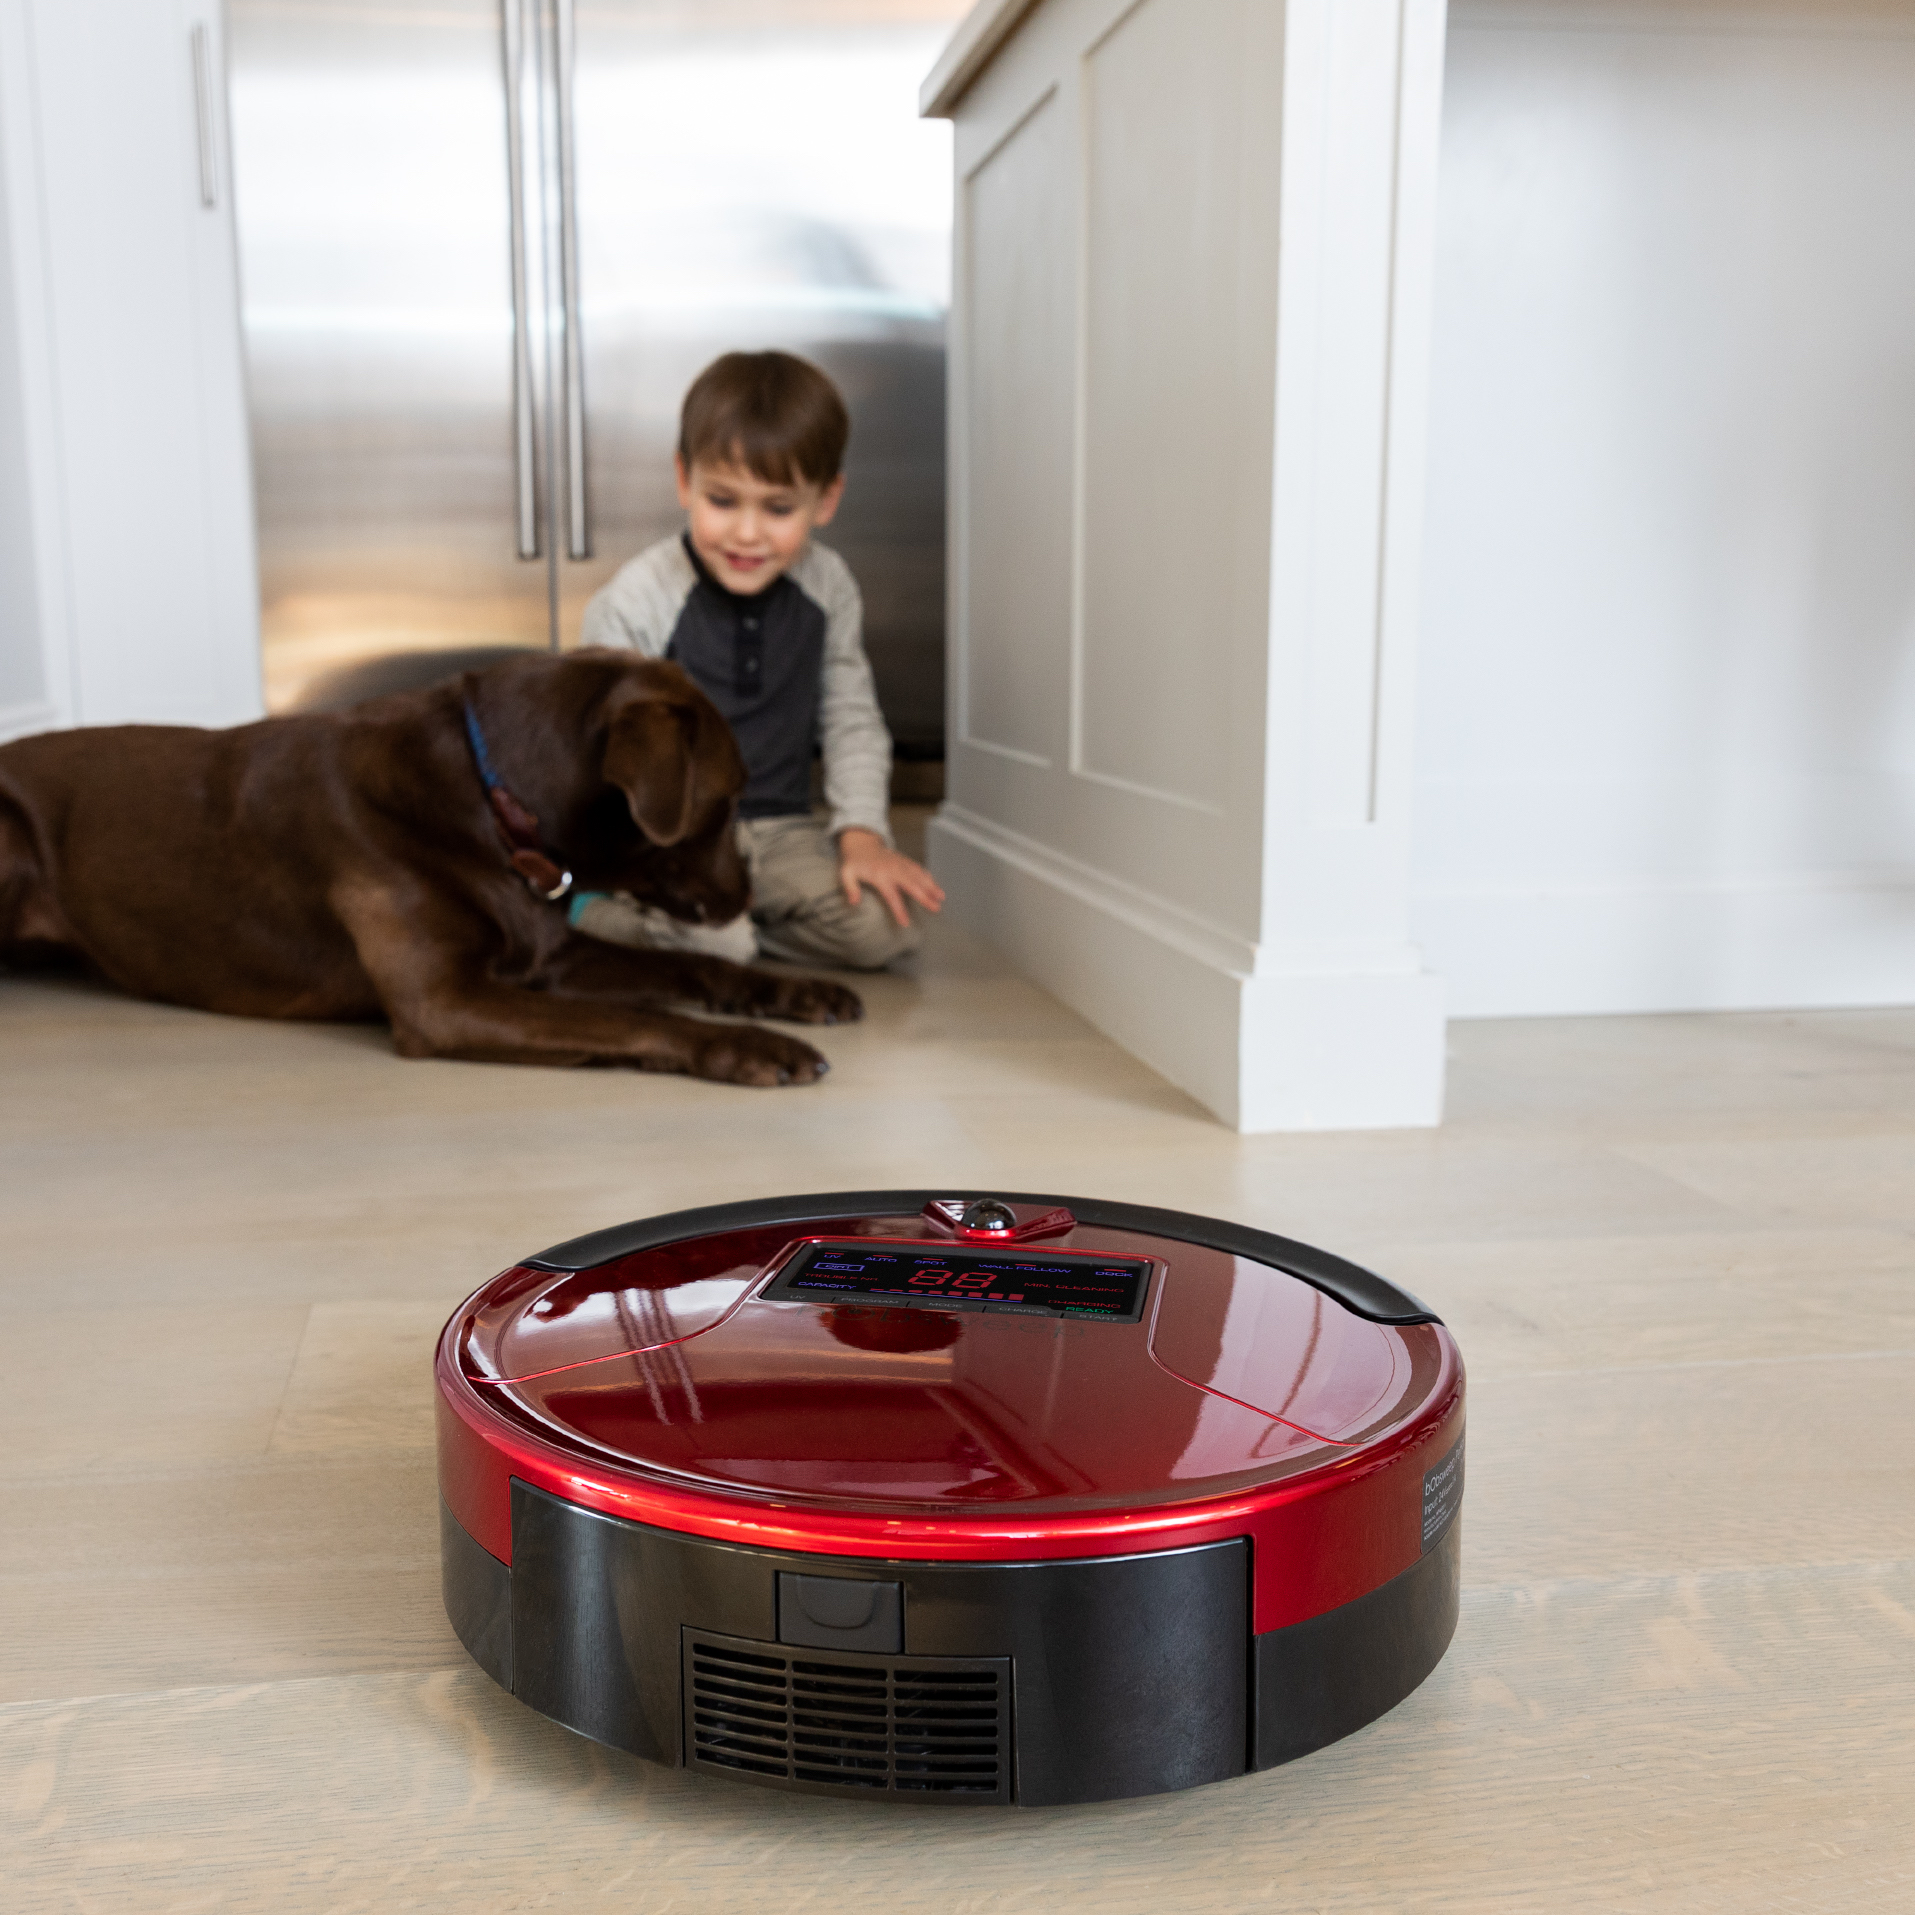 Bobsweep Pet Hair Robotic Vacuum Cleaner and Mop, Rouge - image 7 of 9